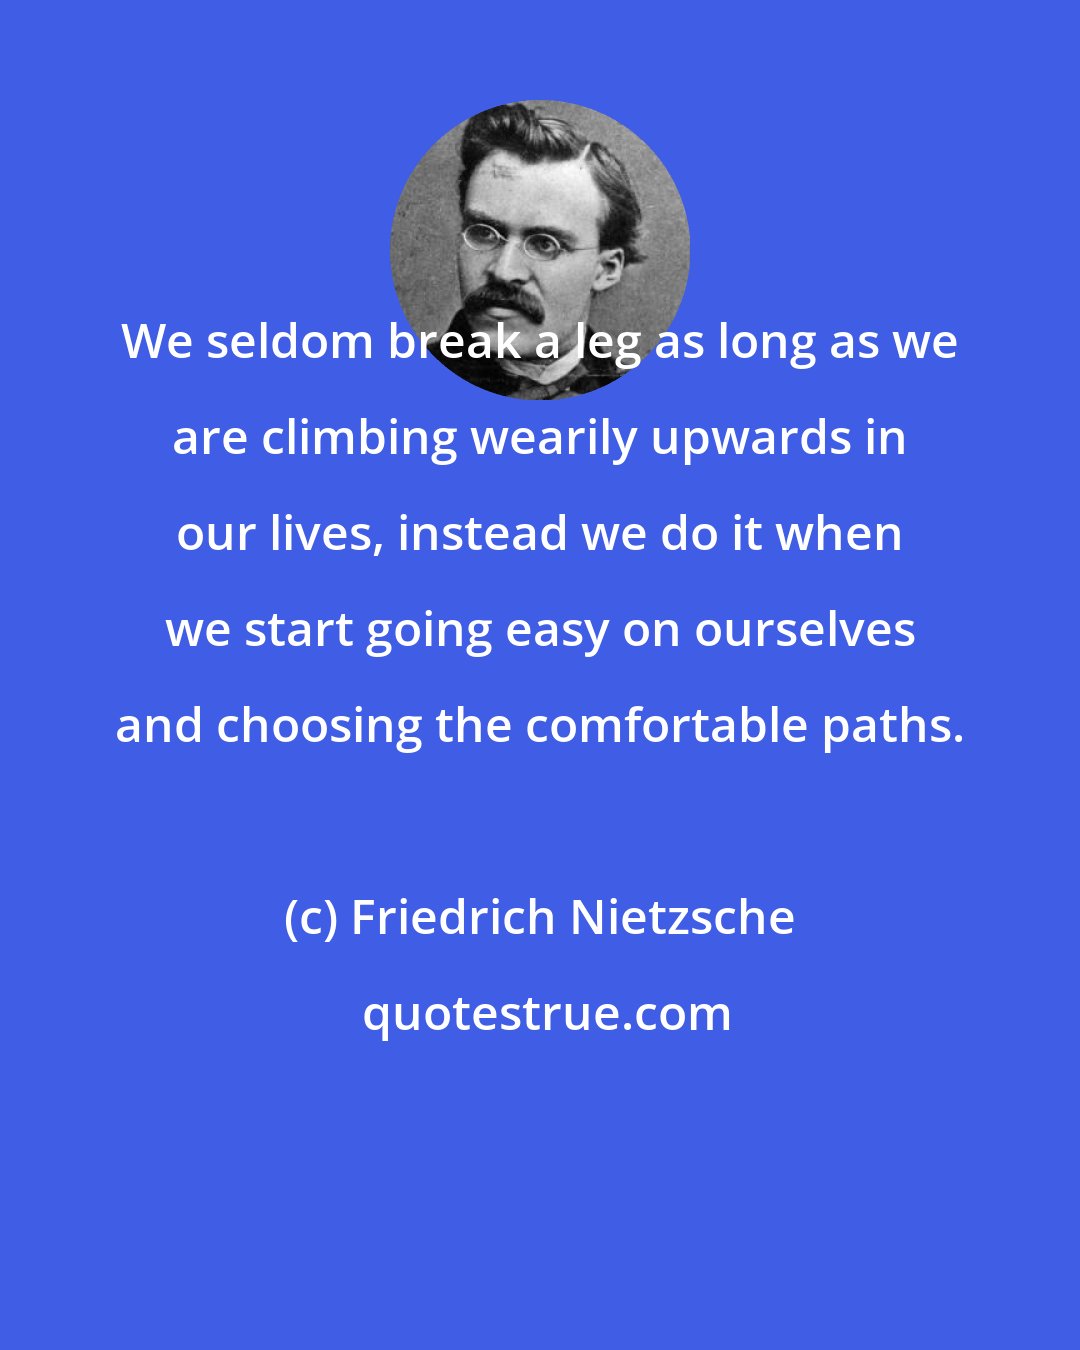 Friedrich Nietzsche: We seldom break a leg as long as we are climbing wearily upwards in our lives, instead we do it when we start going easy on ourselves and choosing the comfortable paths.